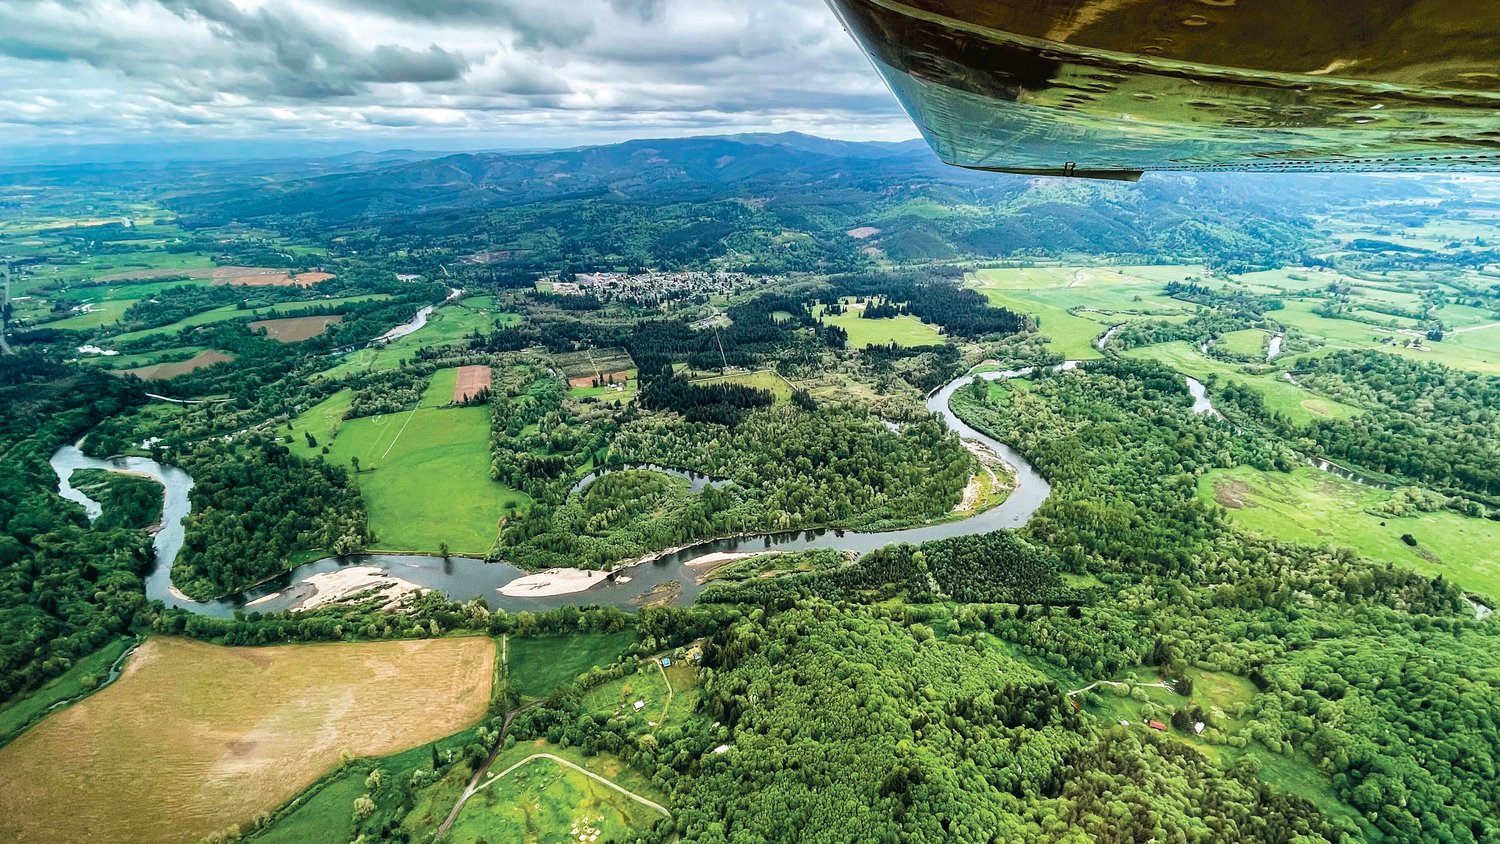 The Chehalis River flows through forests and farmland south of the town of Oakville, which can be seen at the center top of this photograph.